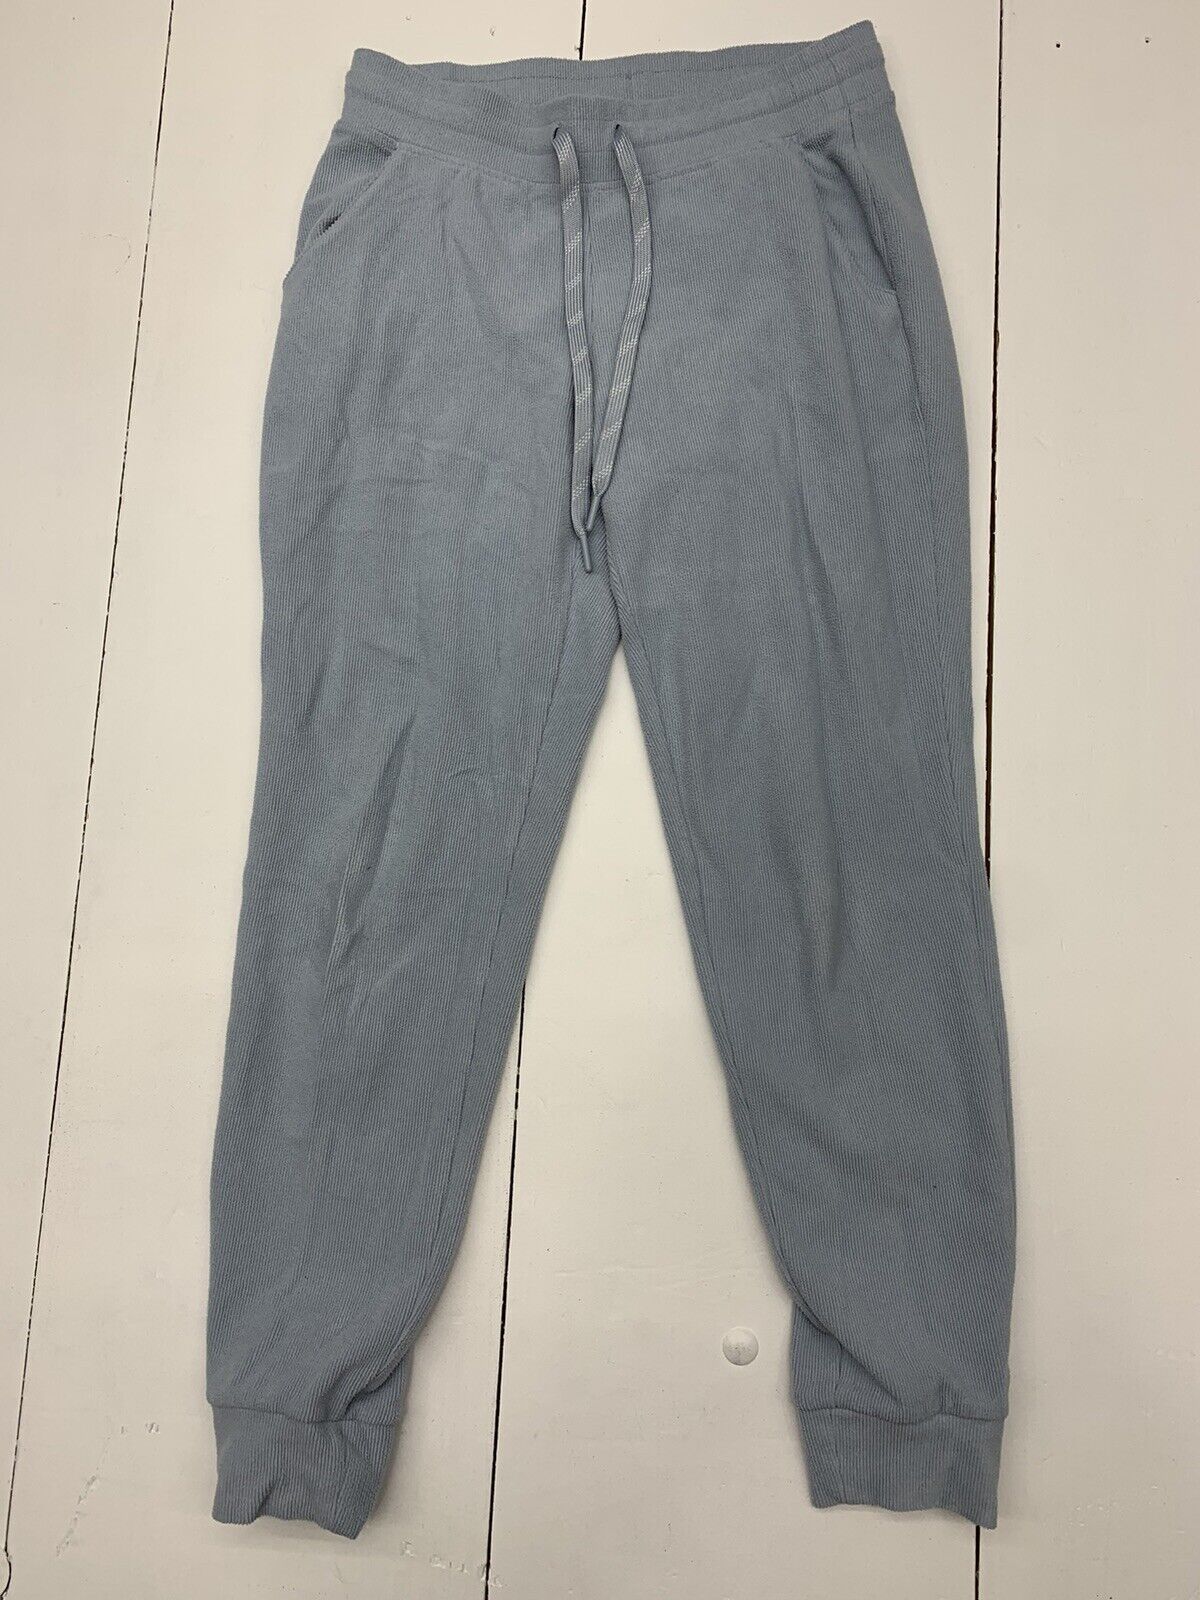 Marc New York Womens Blue Lounge Pants Size Small - beyond exchange